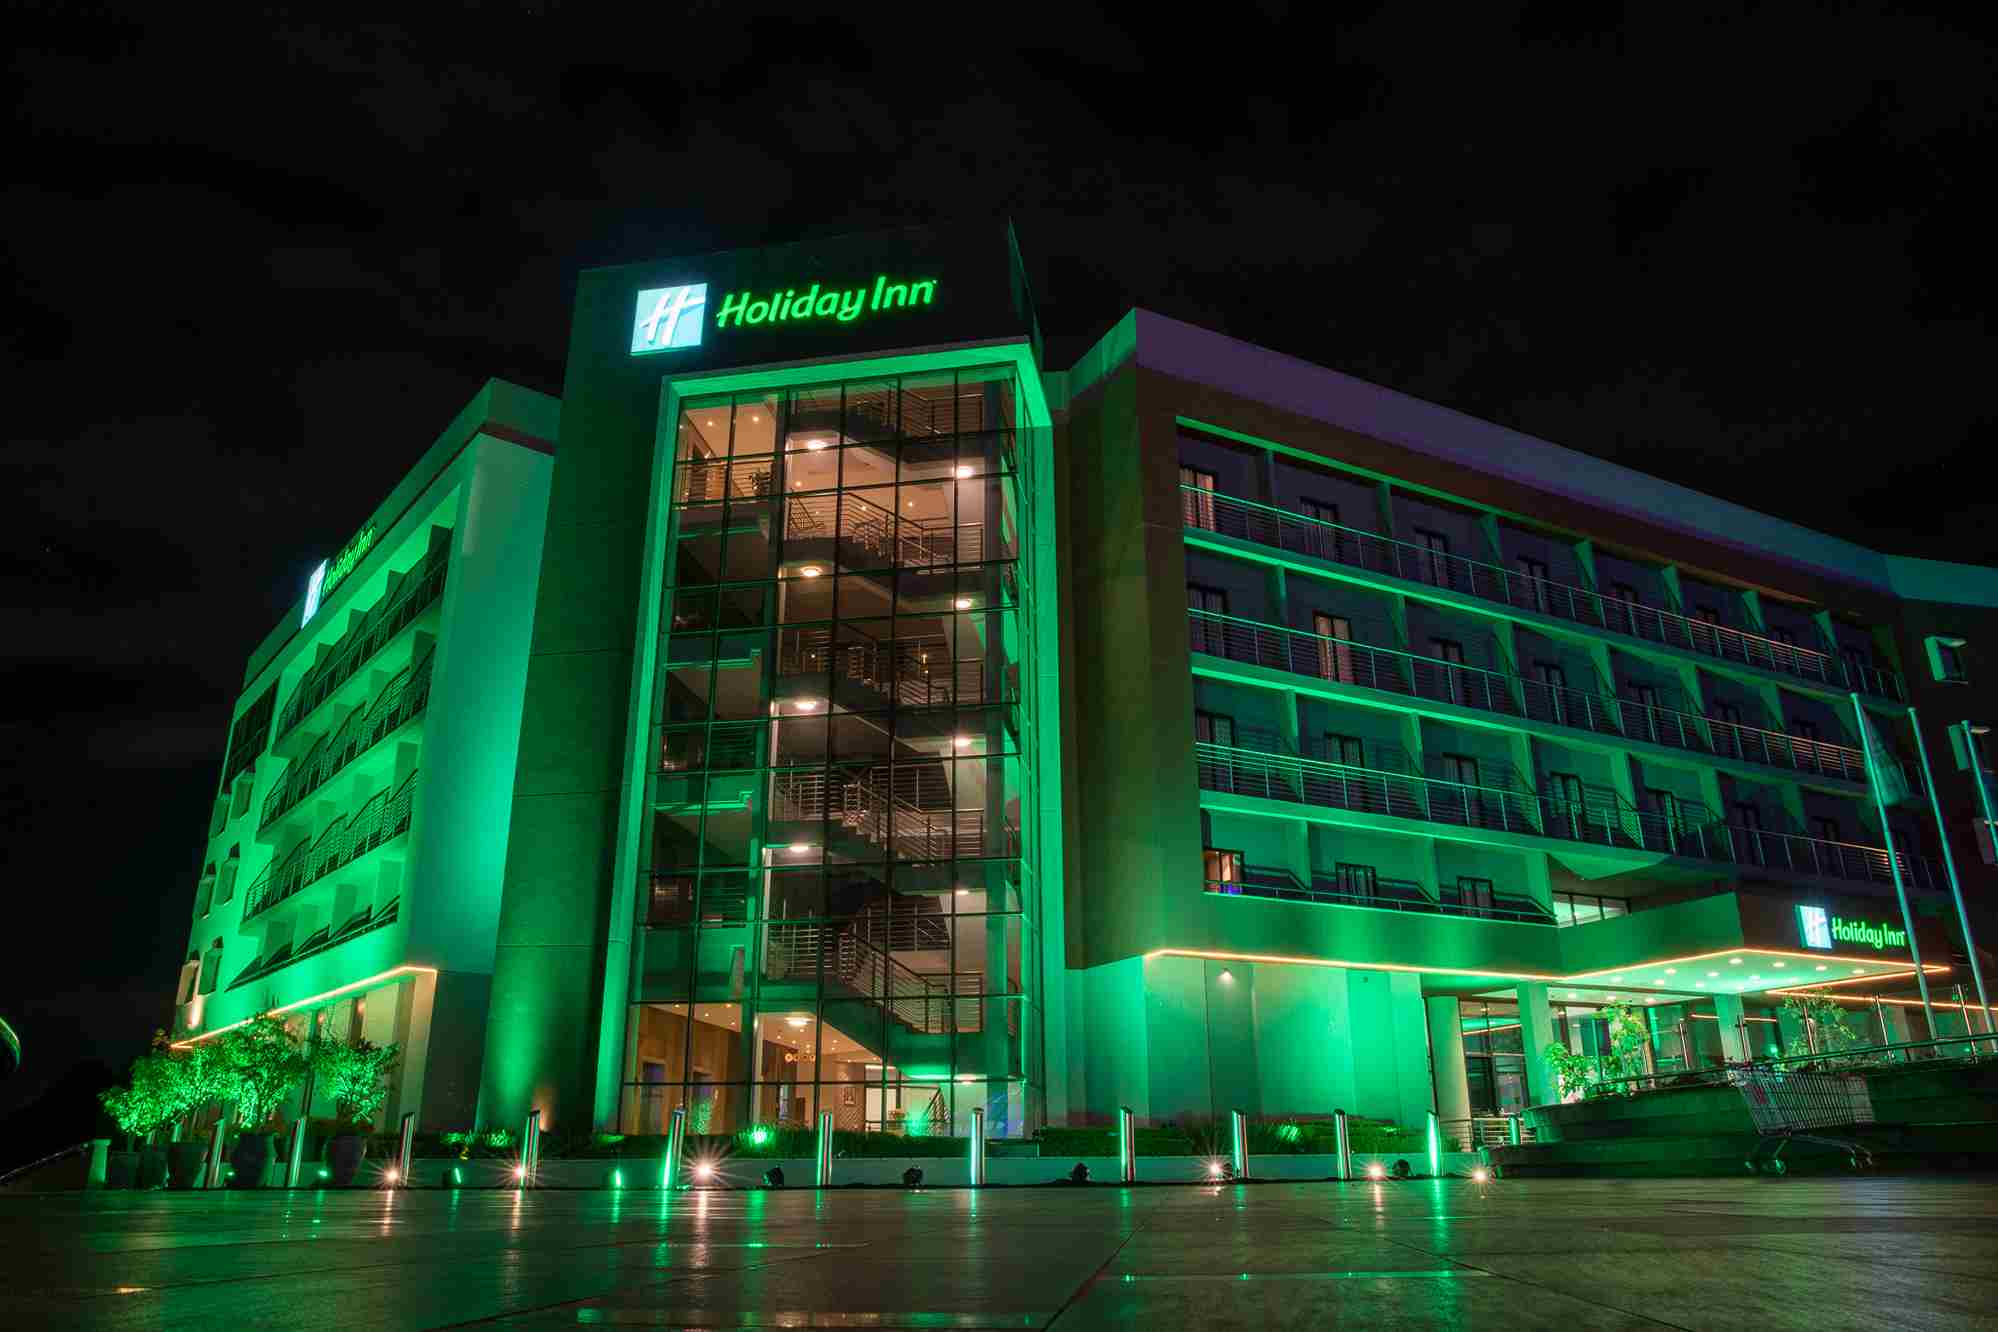 Holiday Inn, Nairobi Hotel is a four-star hotel that provides value-conscious prices and amenities that elegantly blend the classic and the modern, the tranquil and the vibrant – all for the joy of travel.